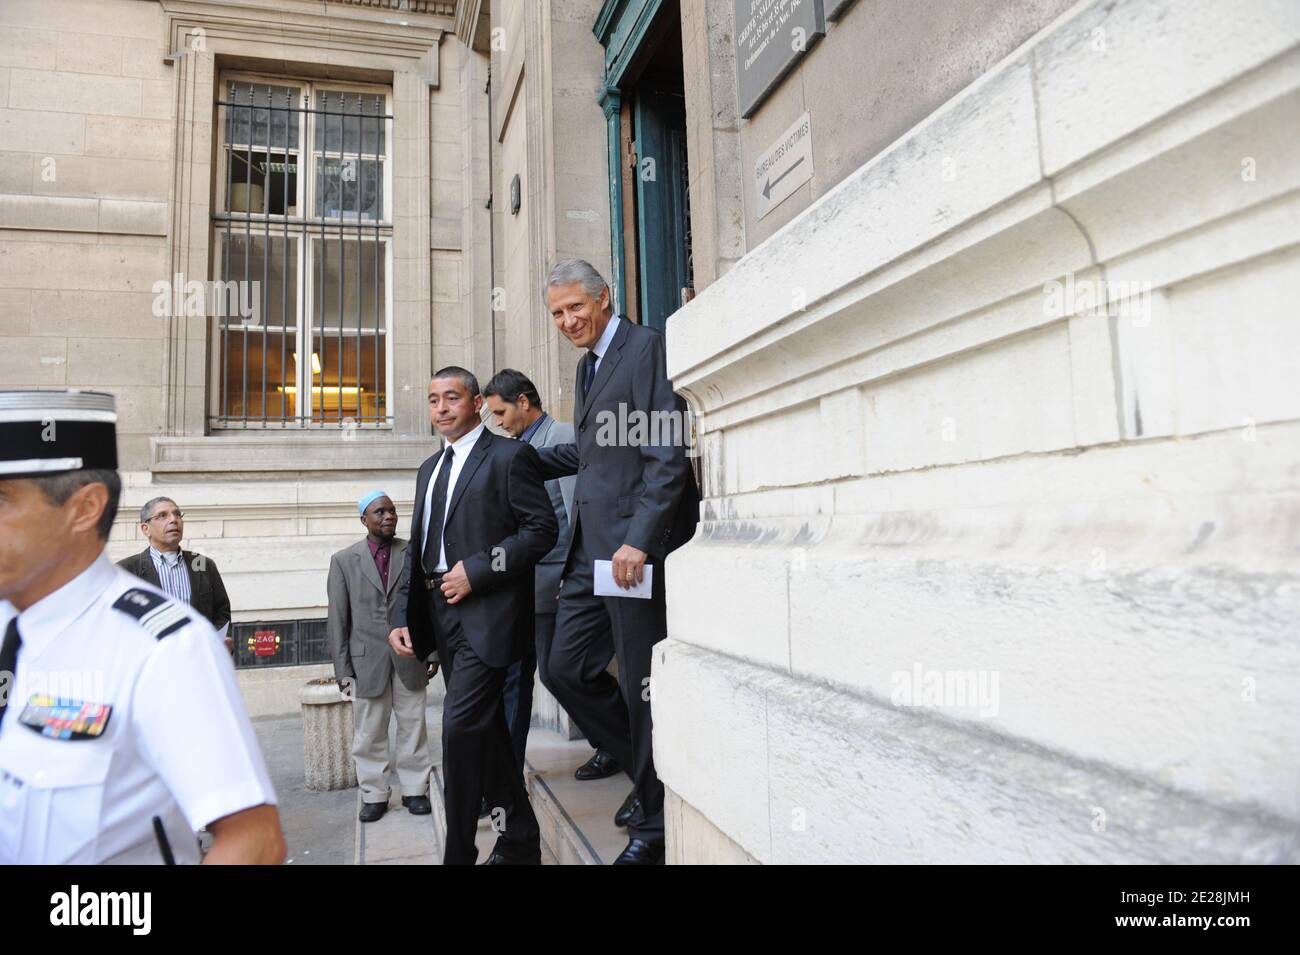 Former French Prime Minister Dominique de Villepin leaves the Court of Appeals after being discharged in the Clearstream case, in Paris, France on September 14, 20111. De Villepin was accused, cleared and then convicted of plotting to discredit him by failing to stop the so-called Clearstream corruption inquiry in 2004. Photo by Mousse/ABACAPRESS.COM Stock Photo